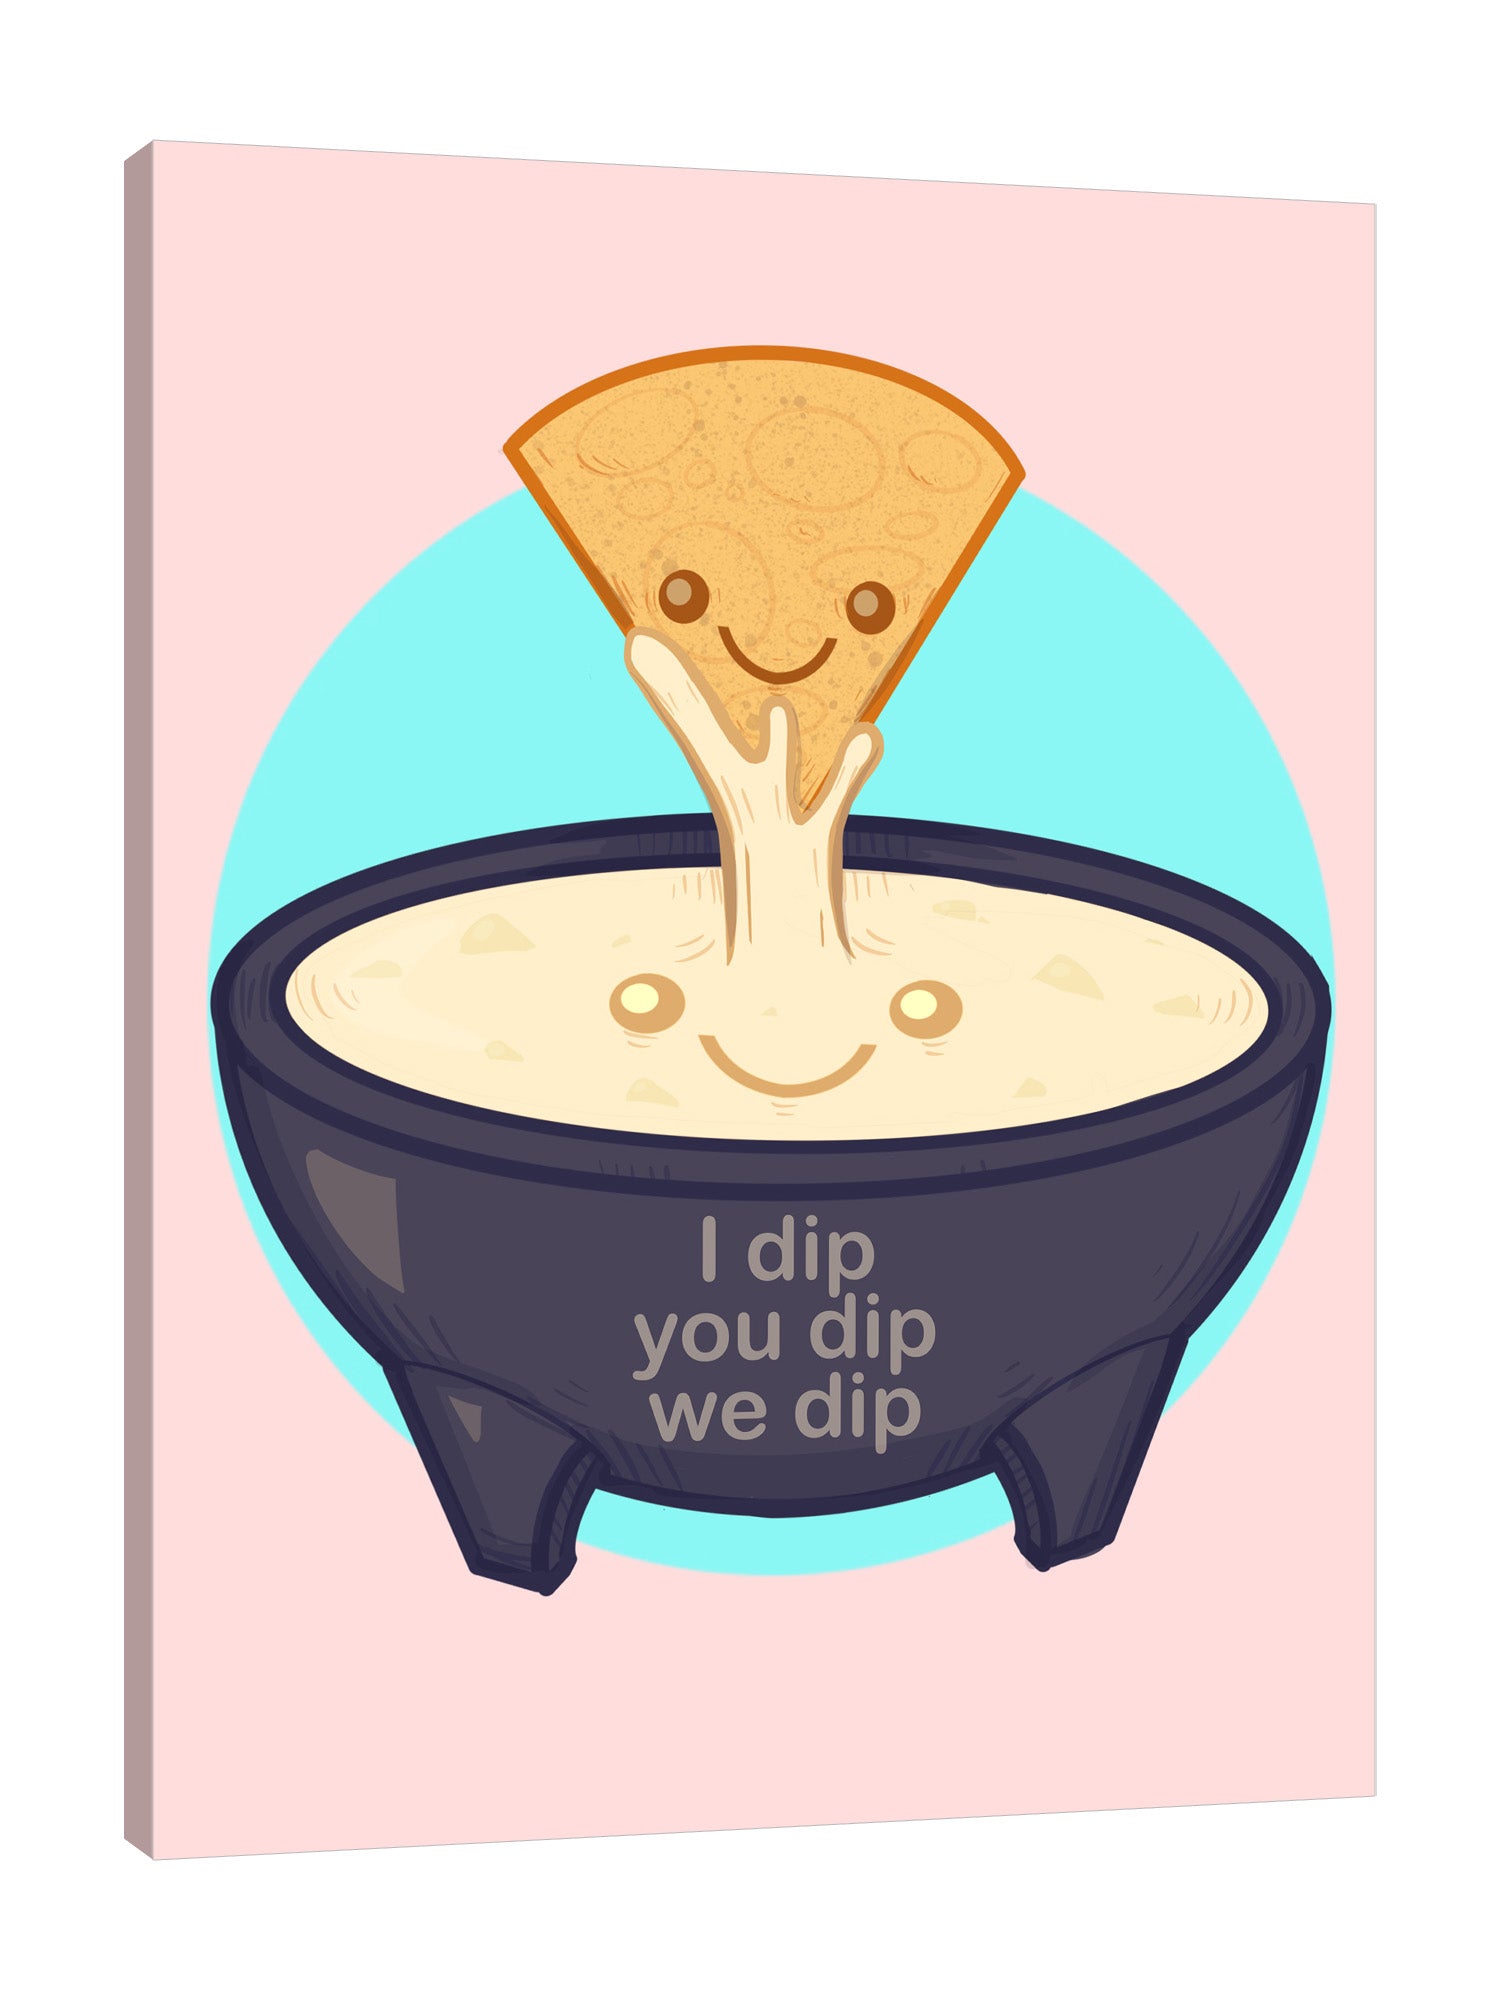 Ludwig-Van-Bacon,Vertical,3X4,Modern & Contemporary,Entertainment,Food & Beverage,Humor,food,foods,snack,snacks.chips,chip,dip,dips,chips and dips,smile,smiley,circle,circles,cheese,words and phrases,words,humor,entertainment,circle,bowl,bowls,I dip you dip we dip,Peach Yellow,Red,Blue,Nude White,Mist Gray,Baby Blue,Charcoal Gray,Gray